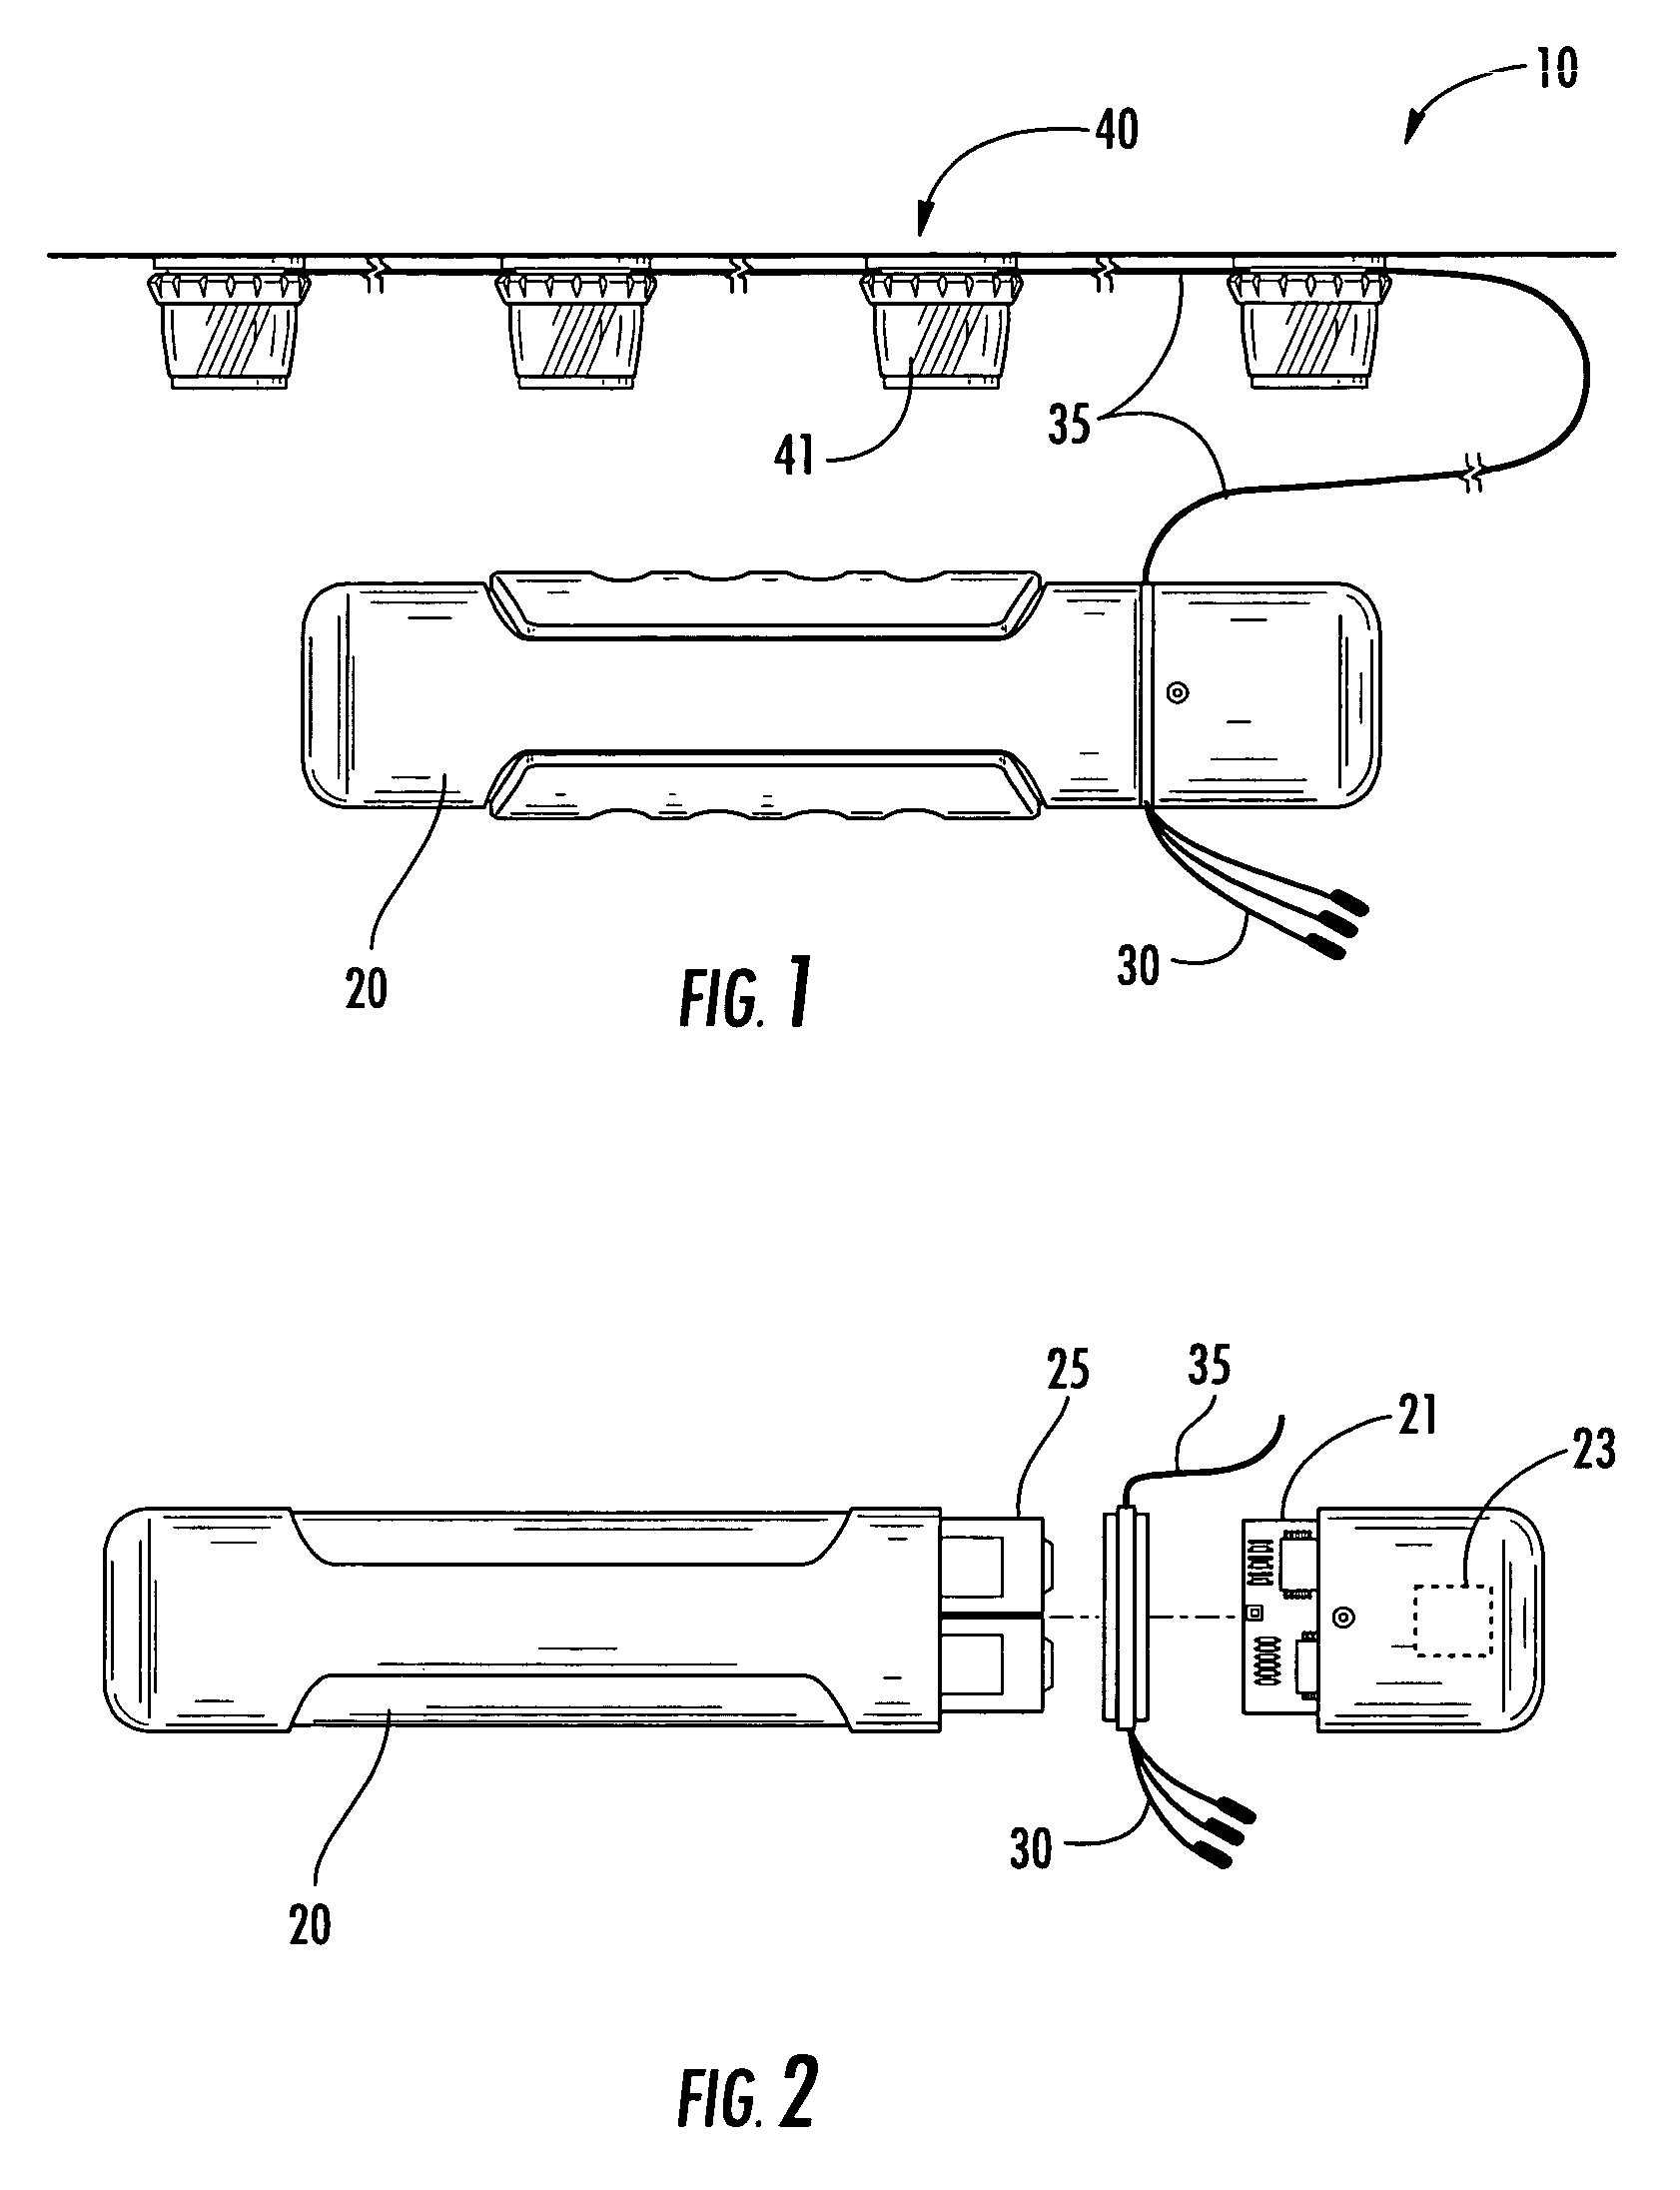 Apparatus and methods for providing an emergency lighting augmentation system